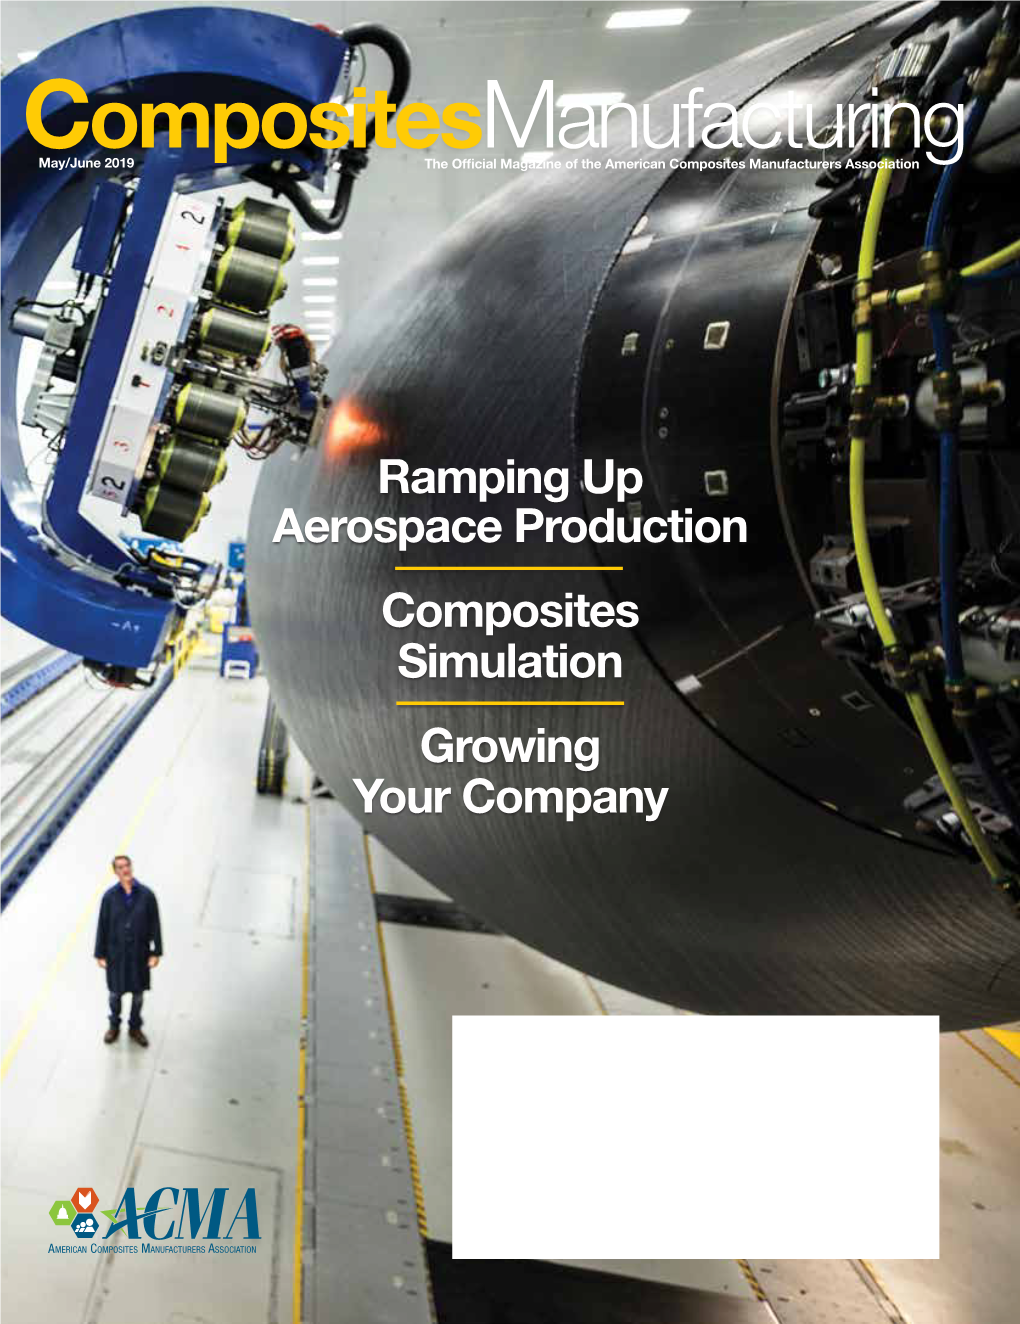 Compositesmanufacturing May/June 2019 the Official Magazine of the American Composites Manufacturers Association